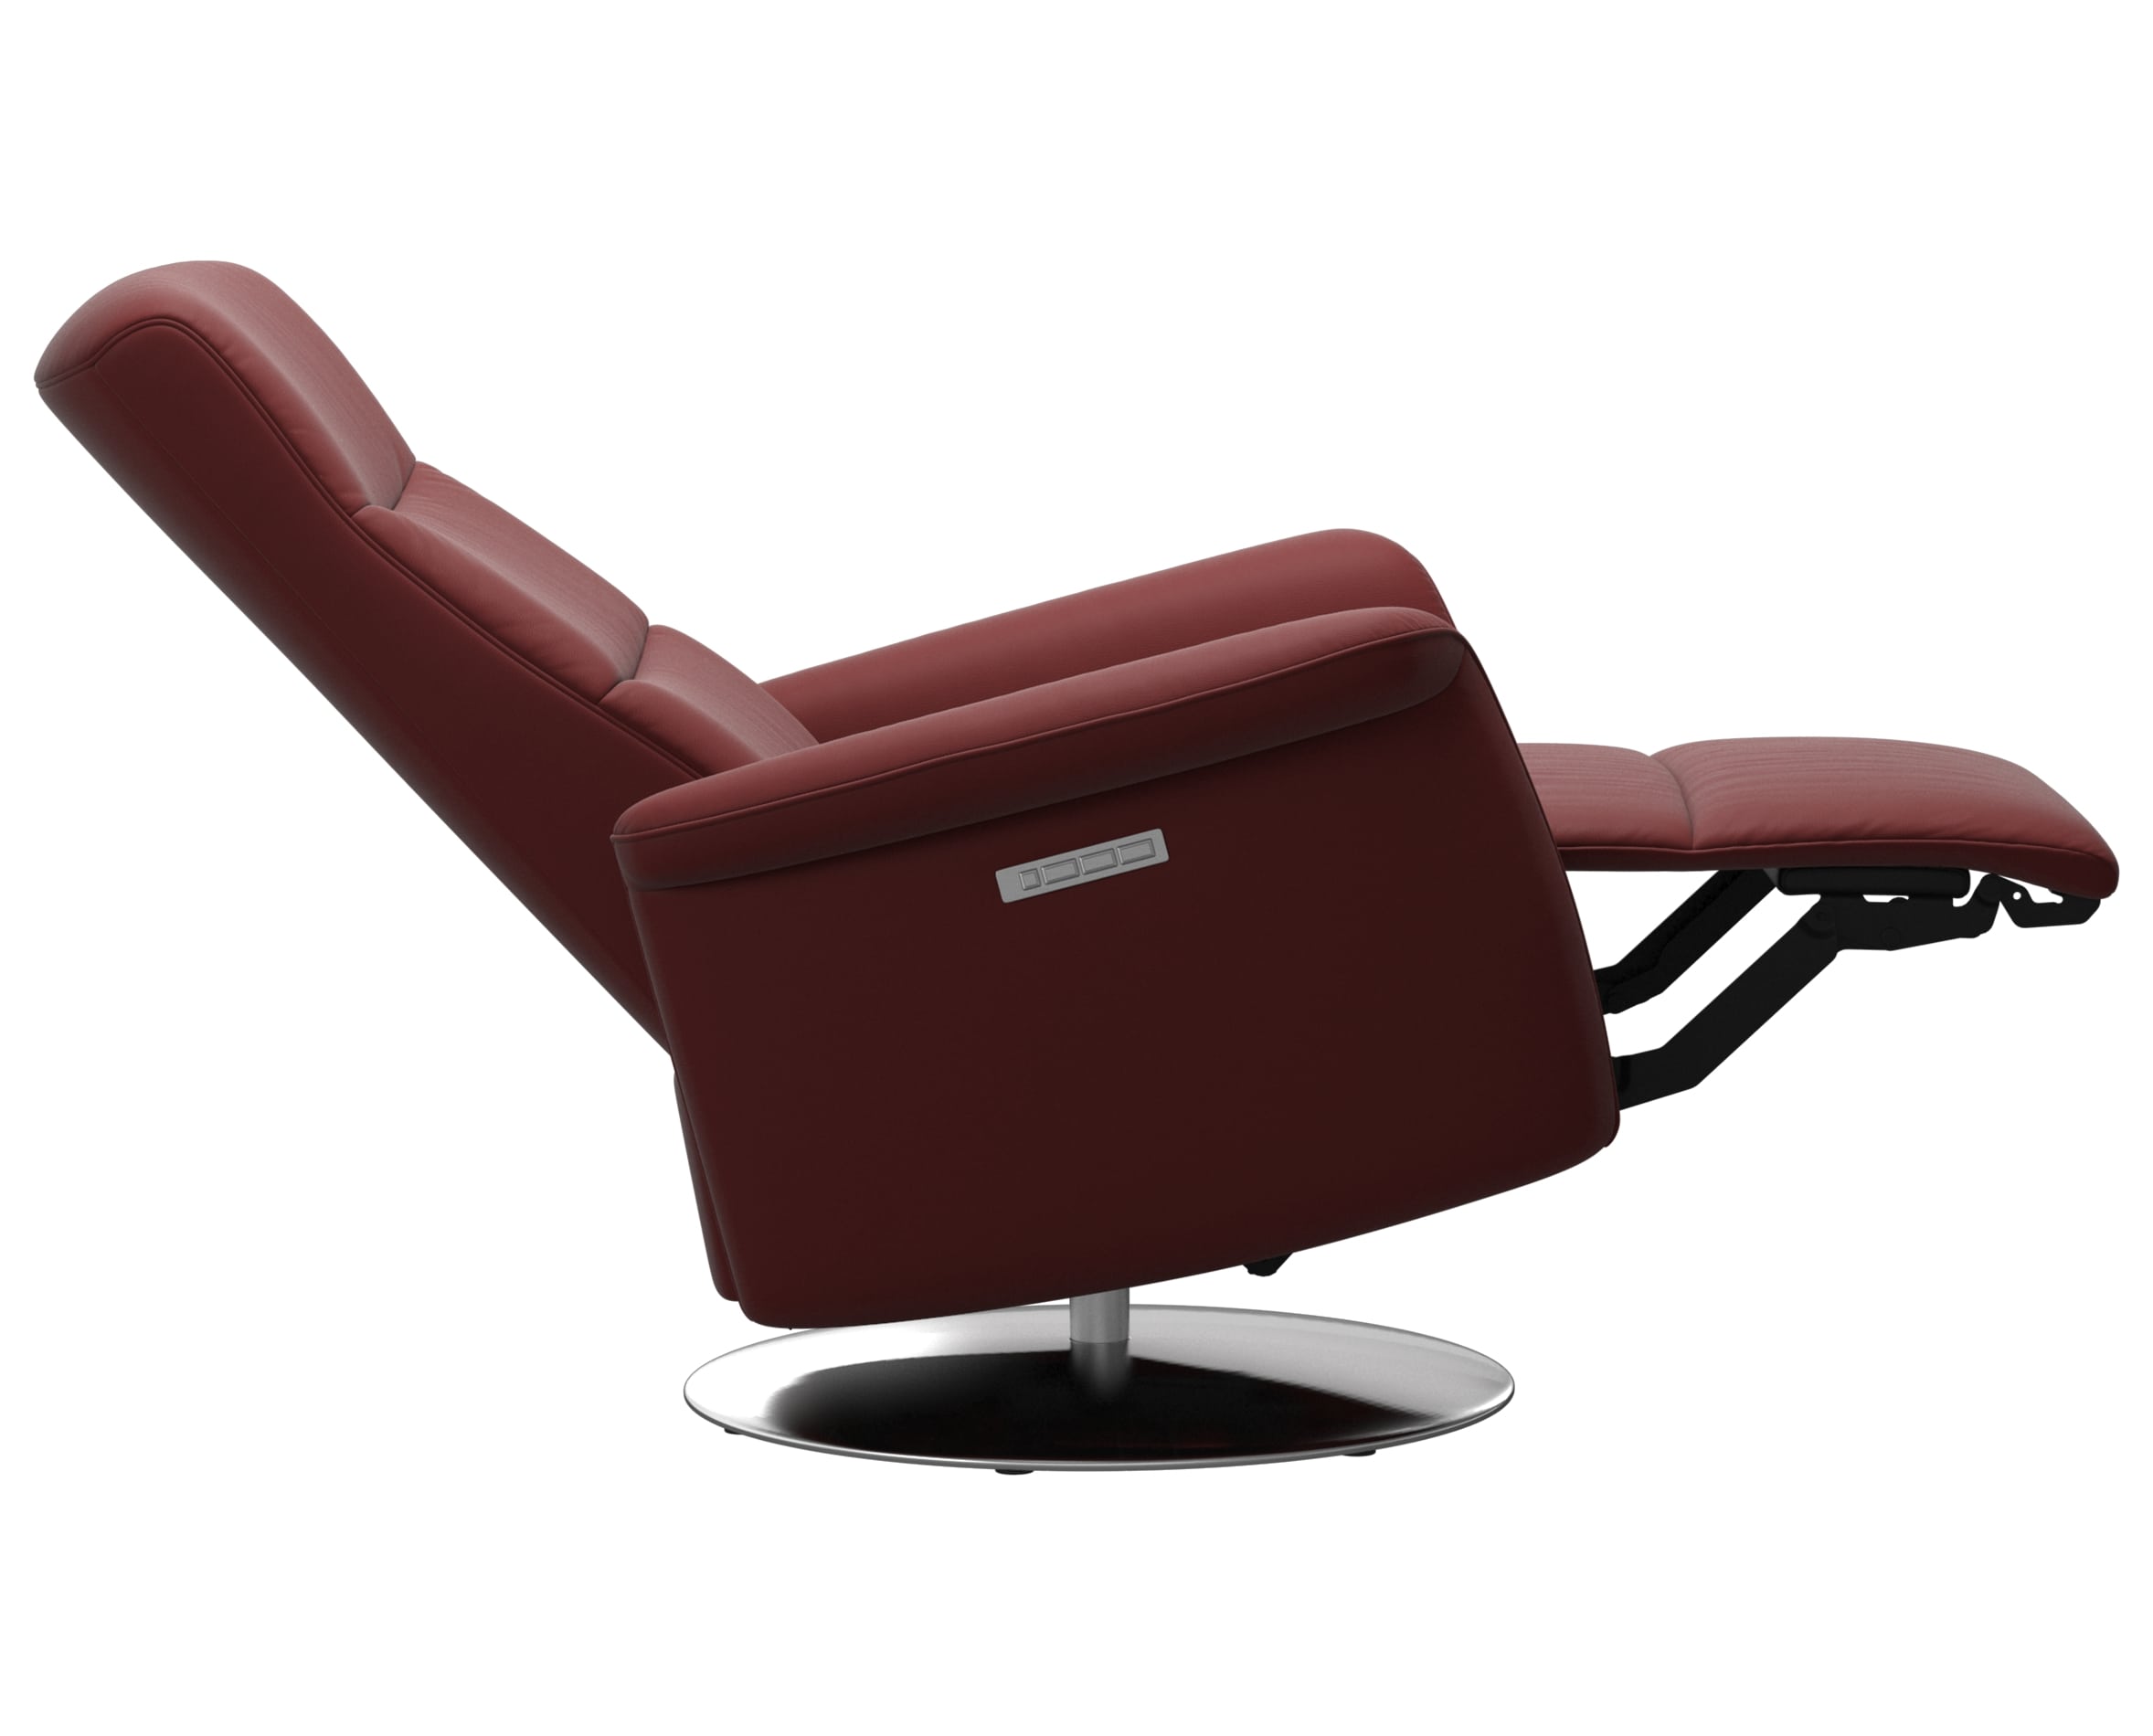 Paloma Leather Cherry S/M/L and Steel Base | Stressless Mike Recliner | Valley Ridge Furniture